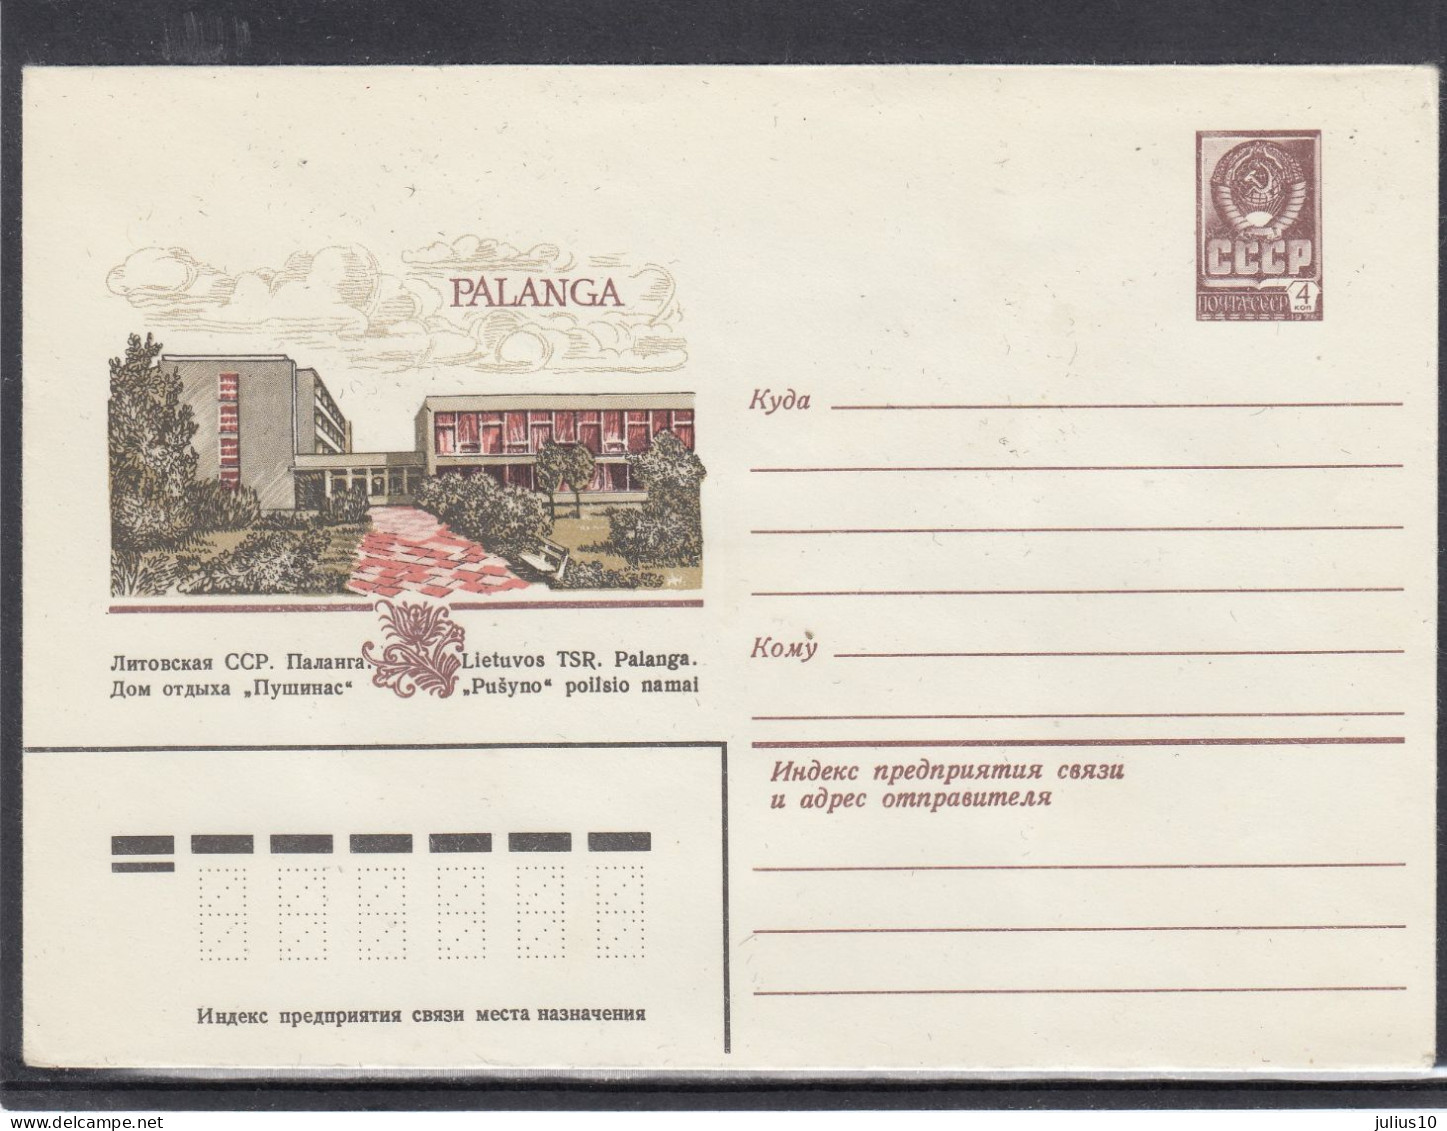 LITHUANIA (USSR) 1980 Cover Palanga Rest House #LTV119 - Litouwen